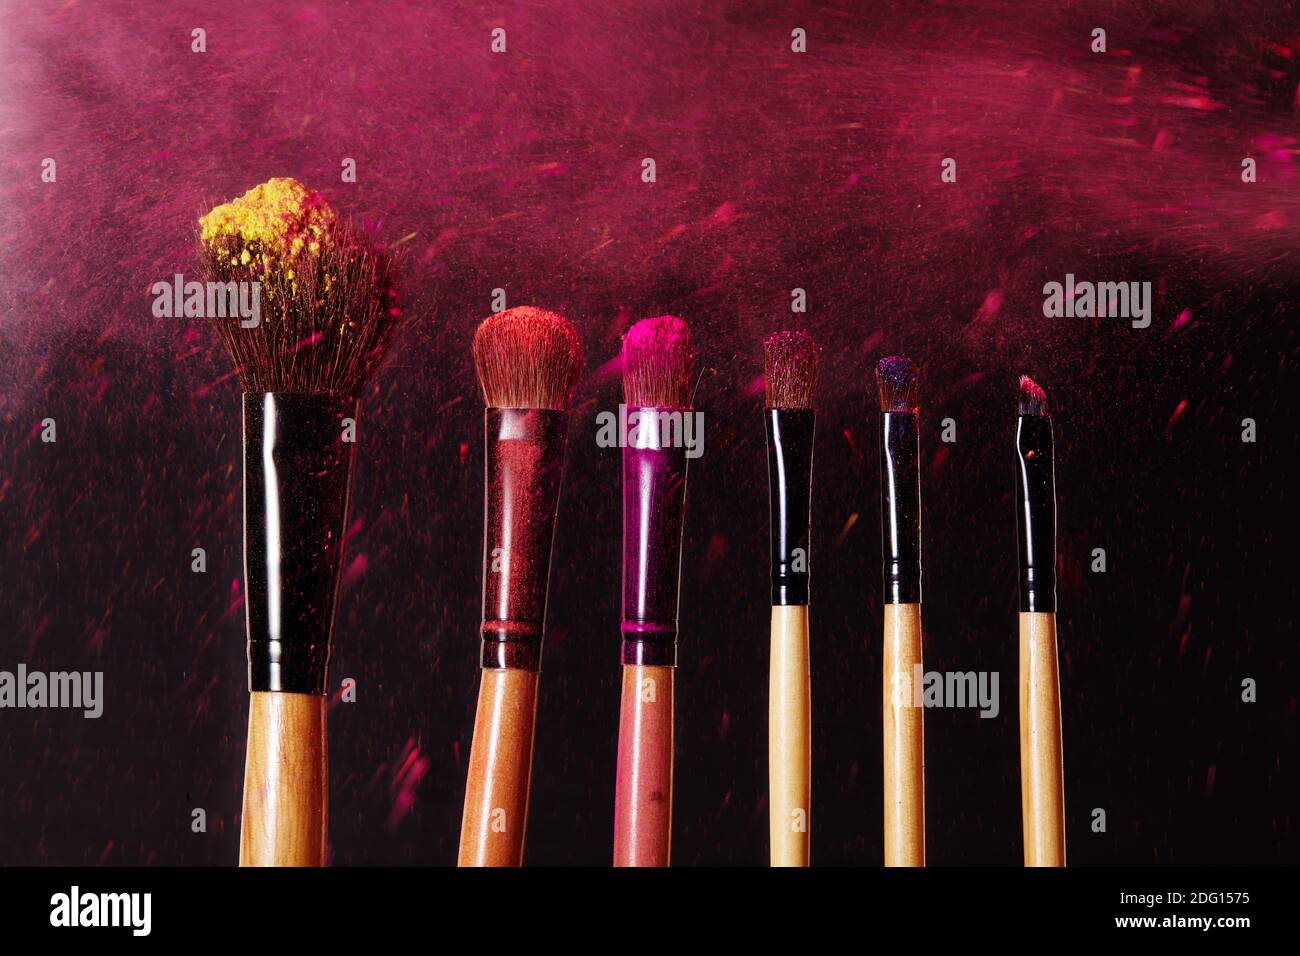 Make-up tools. Brush for makeup. Cosmetic brushes on black with bright dust splash. Colorful pink shadows pigment. Stock Photo